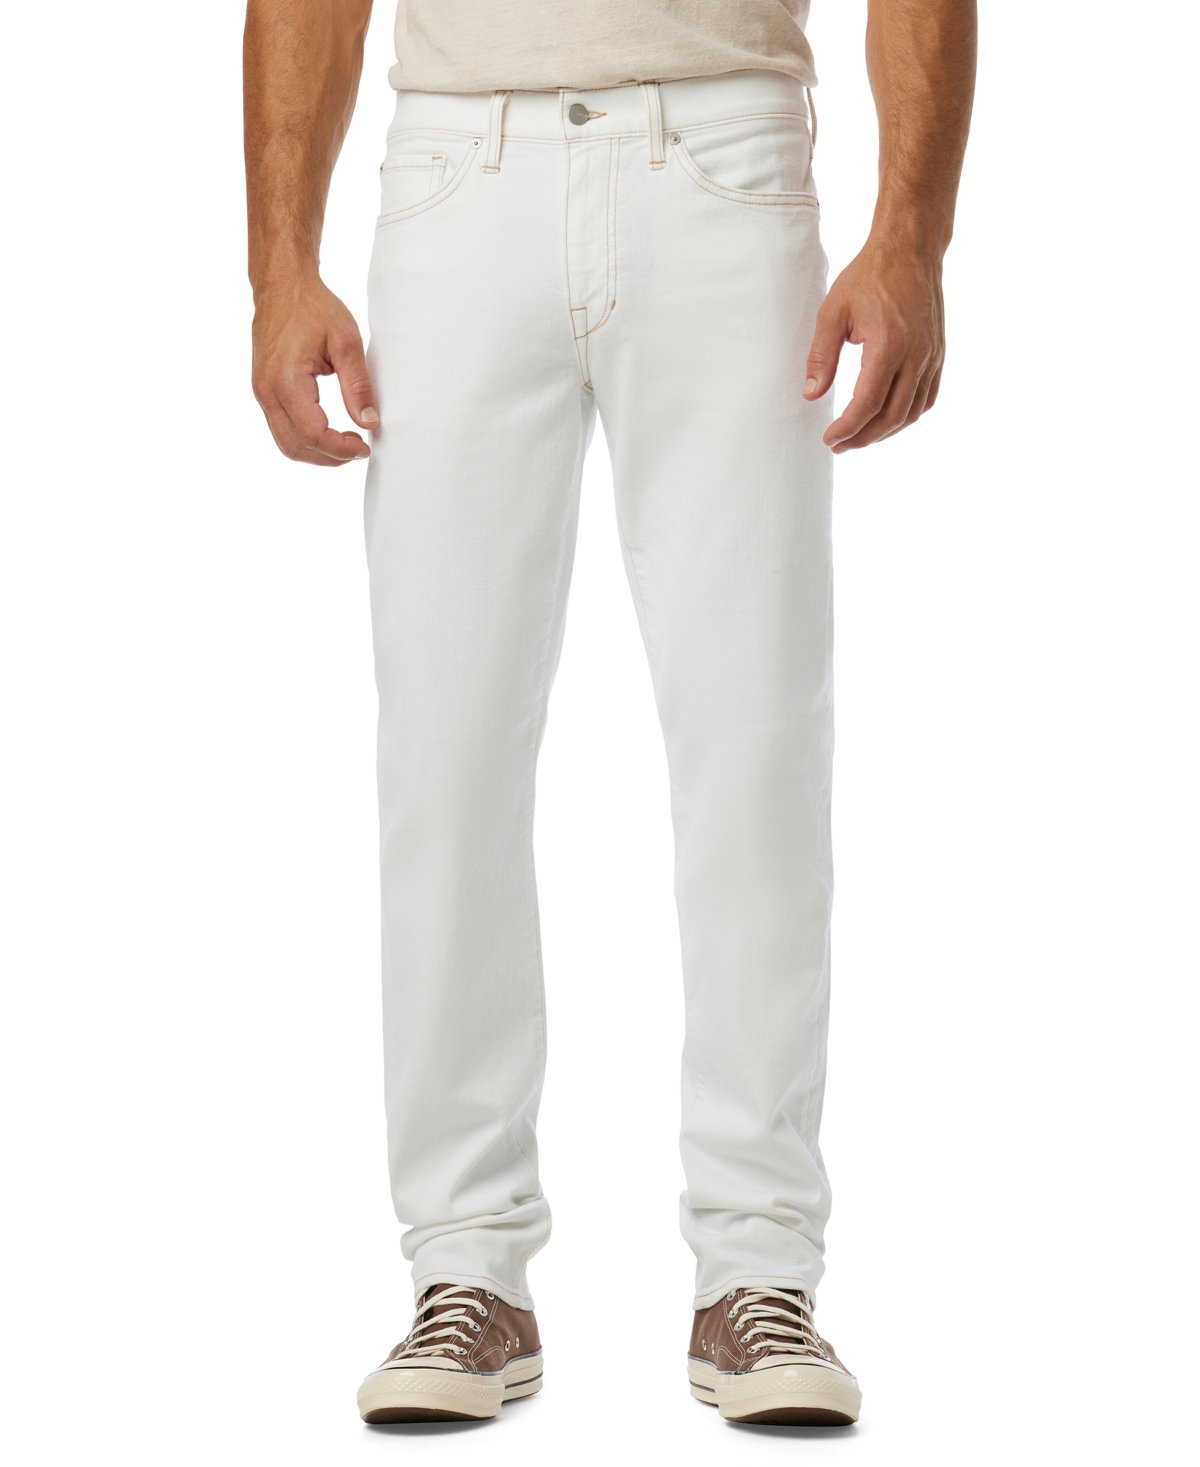 Men's The Brixton Slim-Straight Fit Twill Jeans in Clean White - Clean White